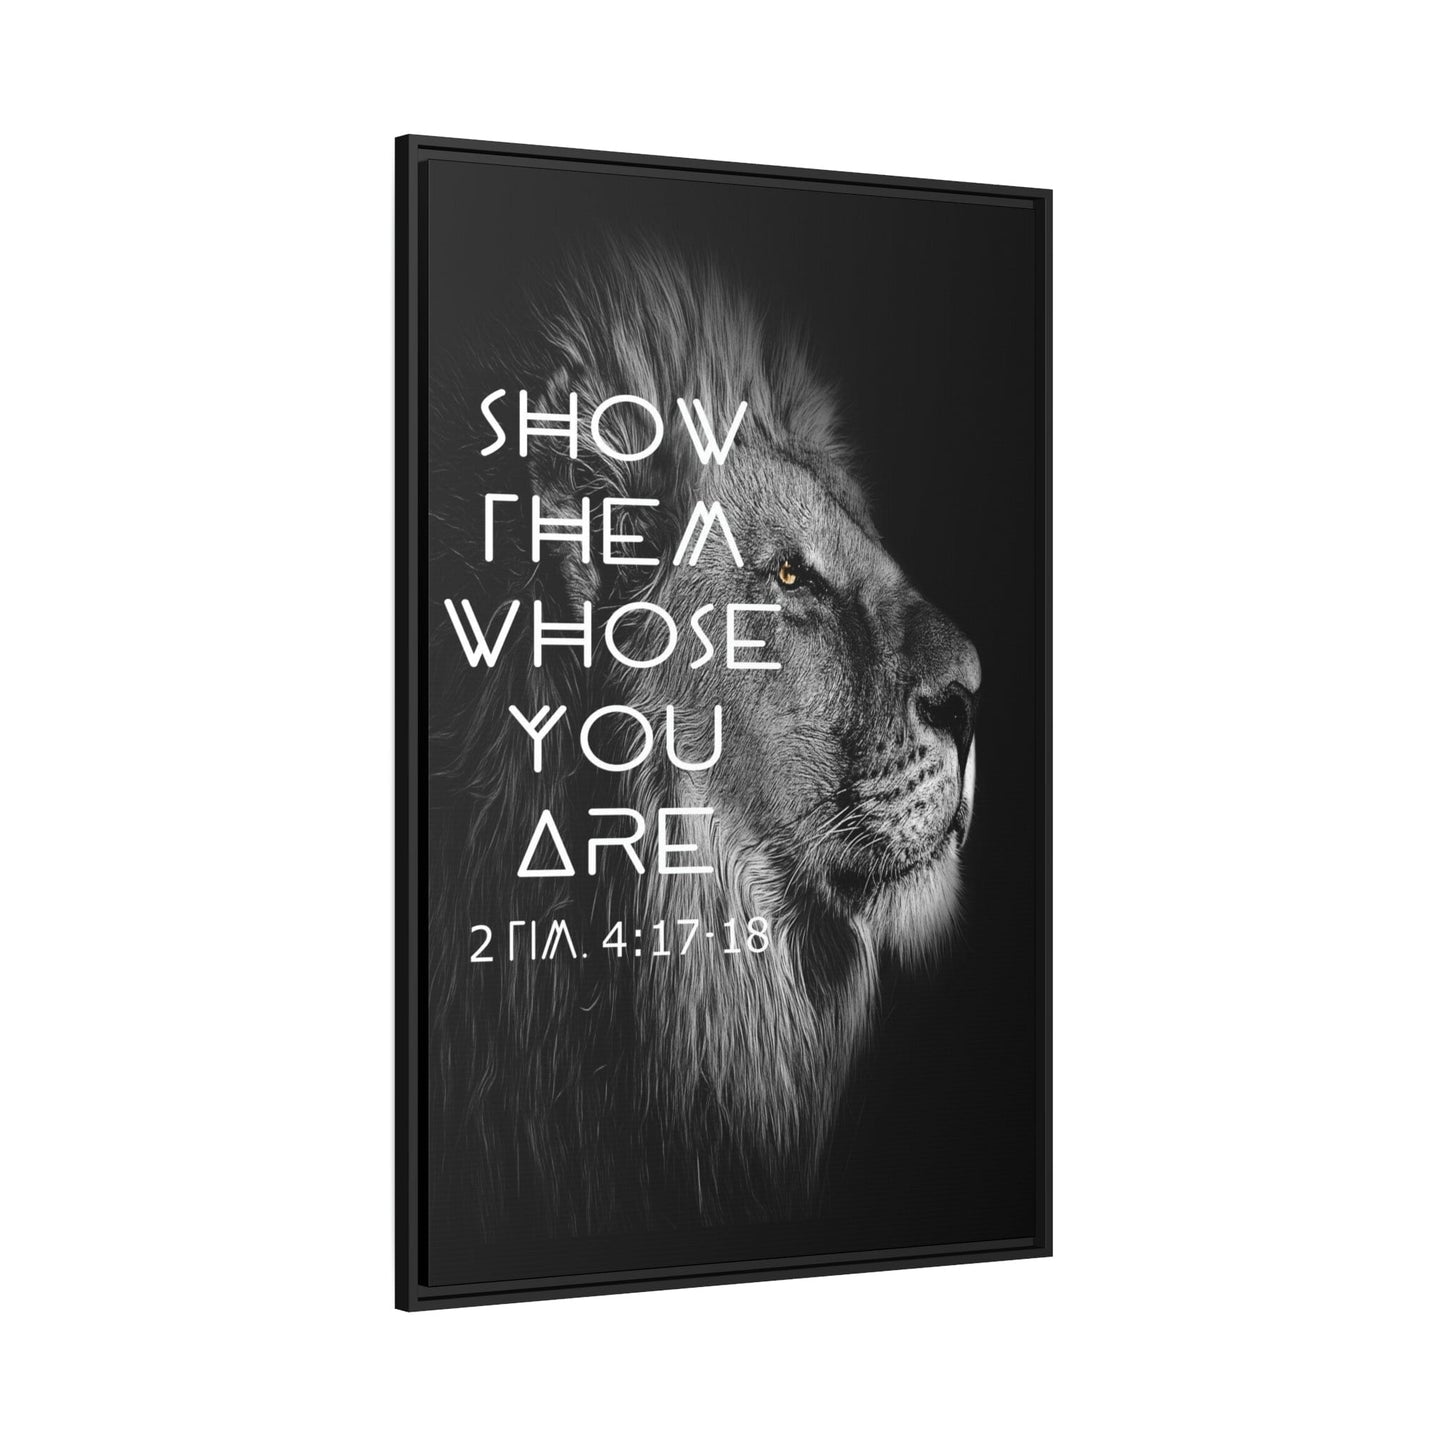 Printify Canvas Show Them Whose You Are - 2 Tim 4:17-18 Christian Canvas Wall Art